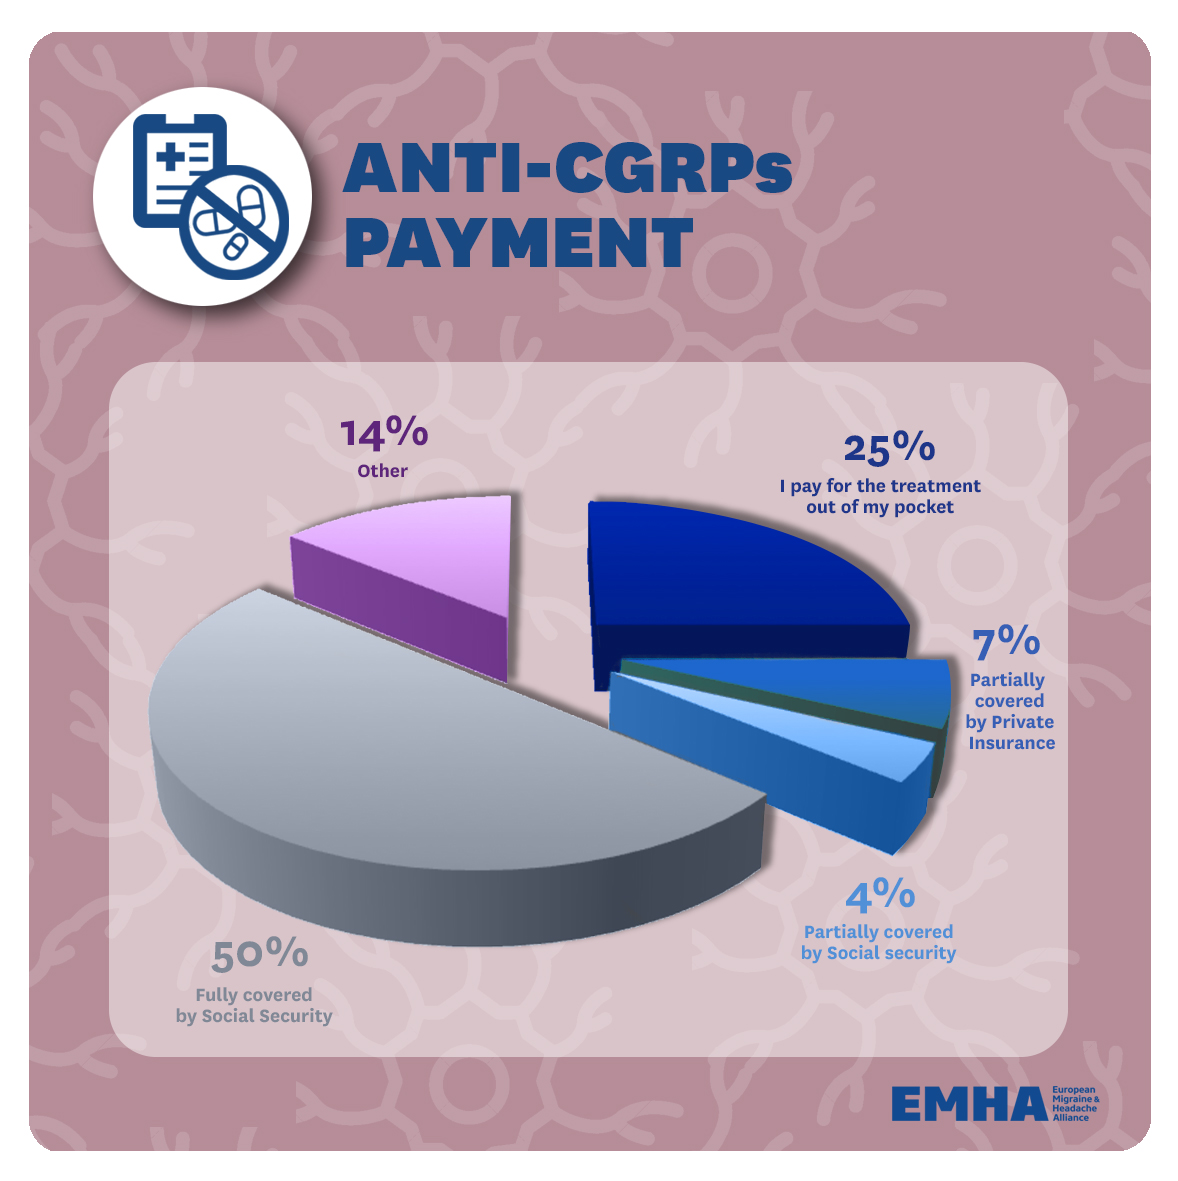 27.-Anti-CGRPs-payment